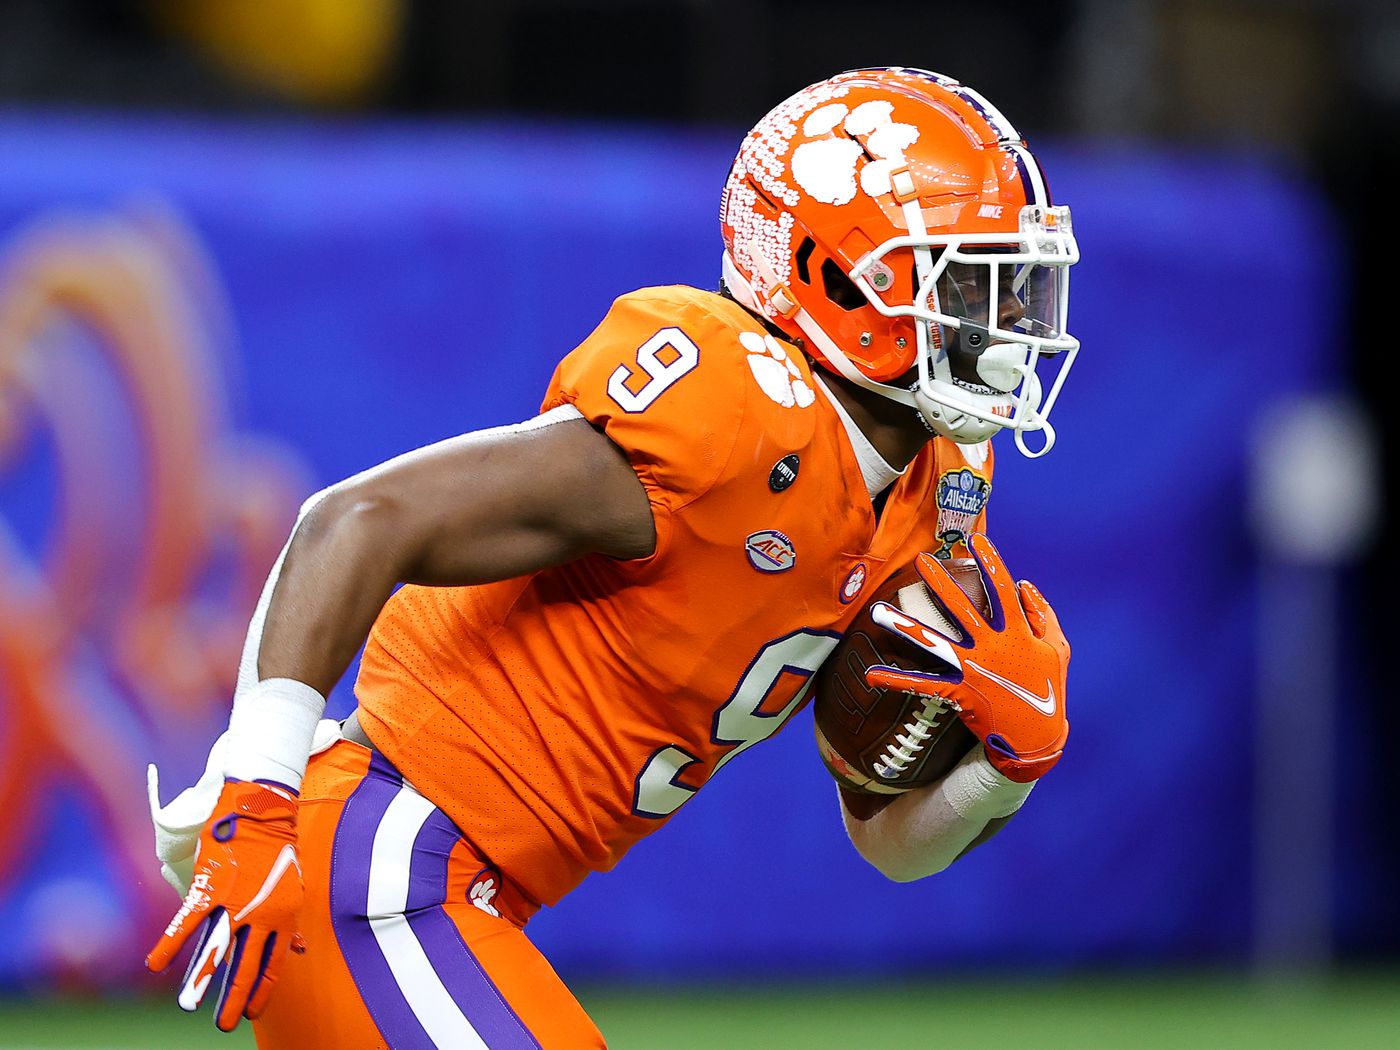 Travis etienne scouting report nfl draft profile and fantasy football projections